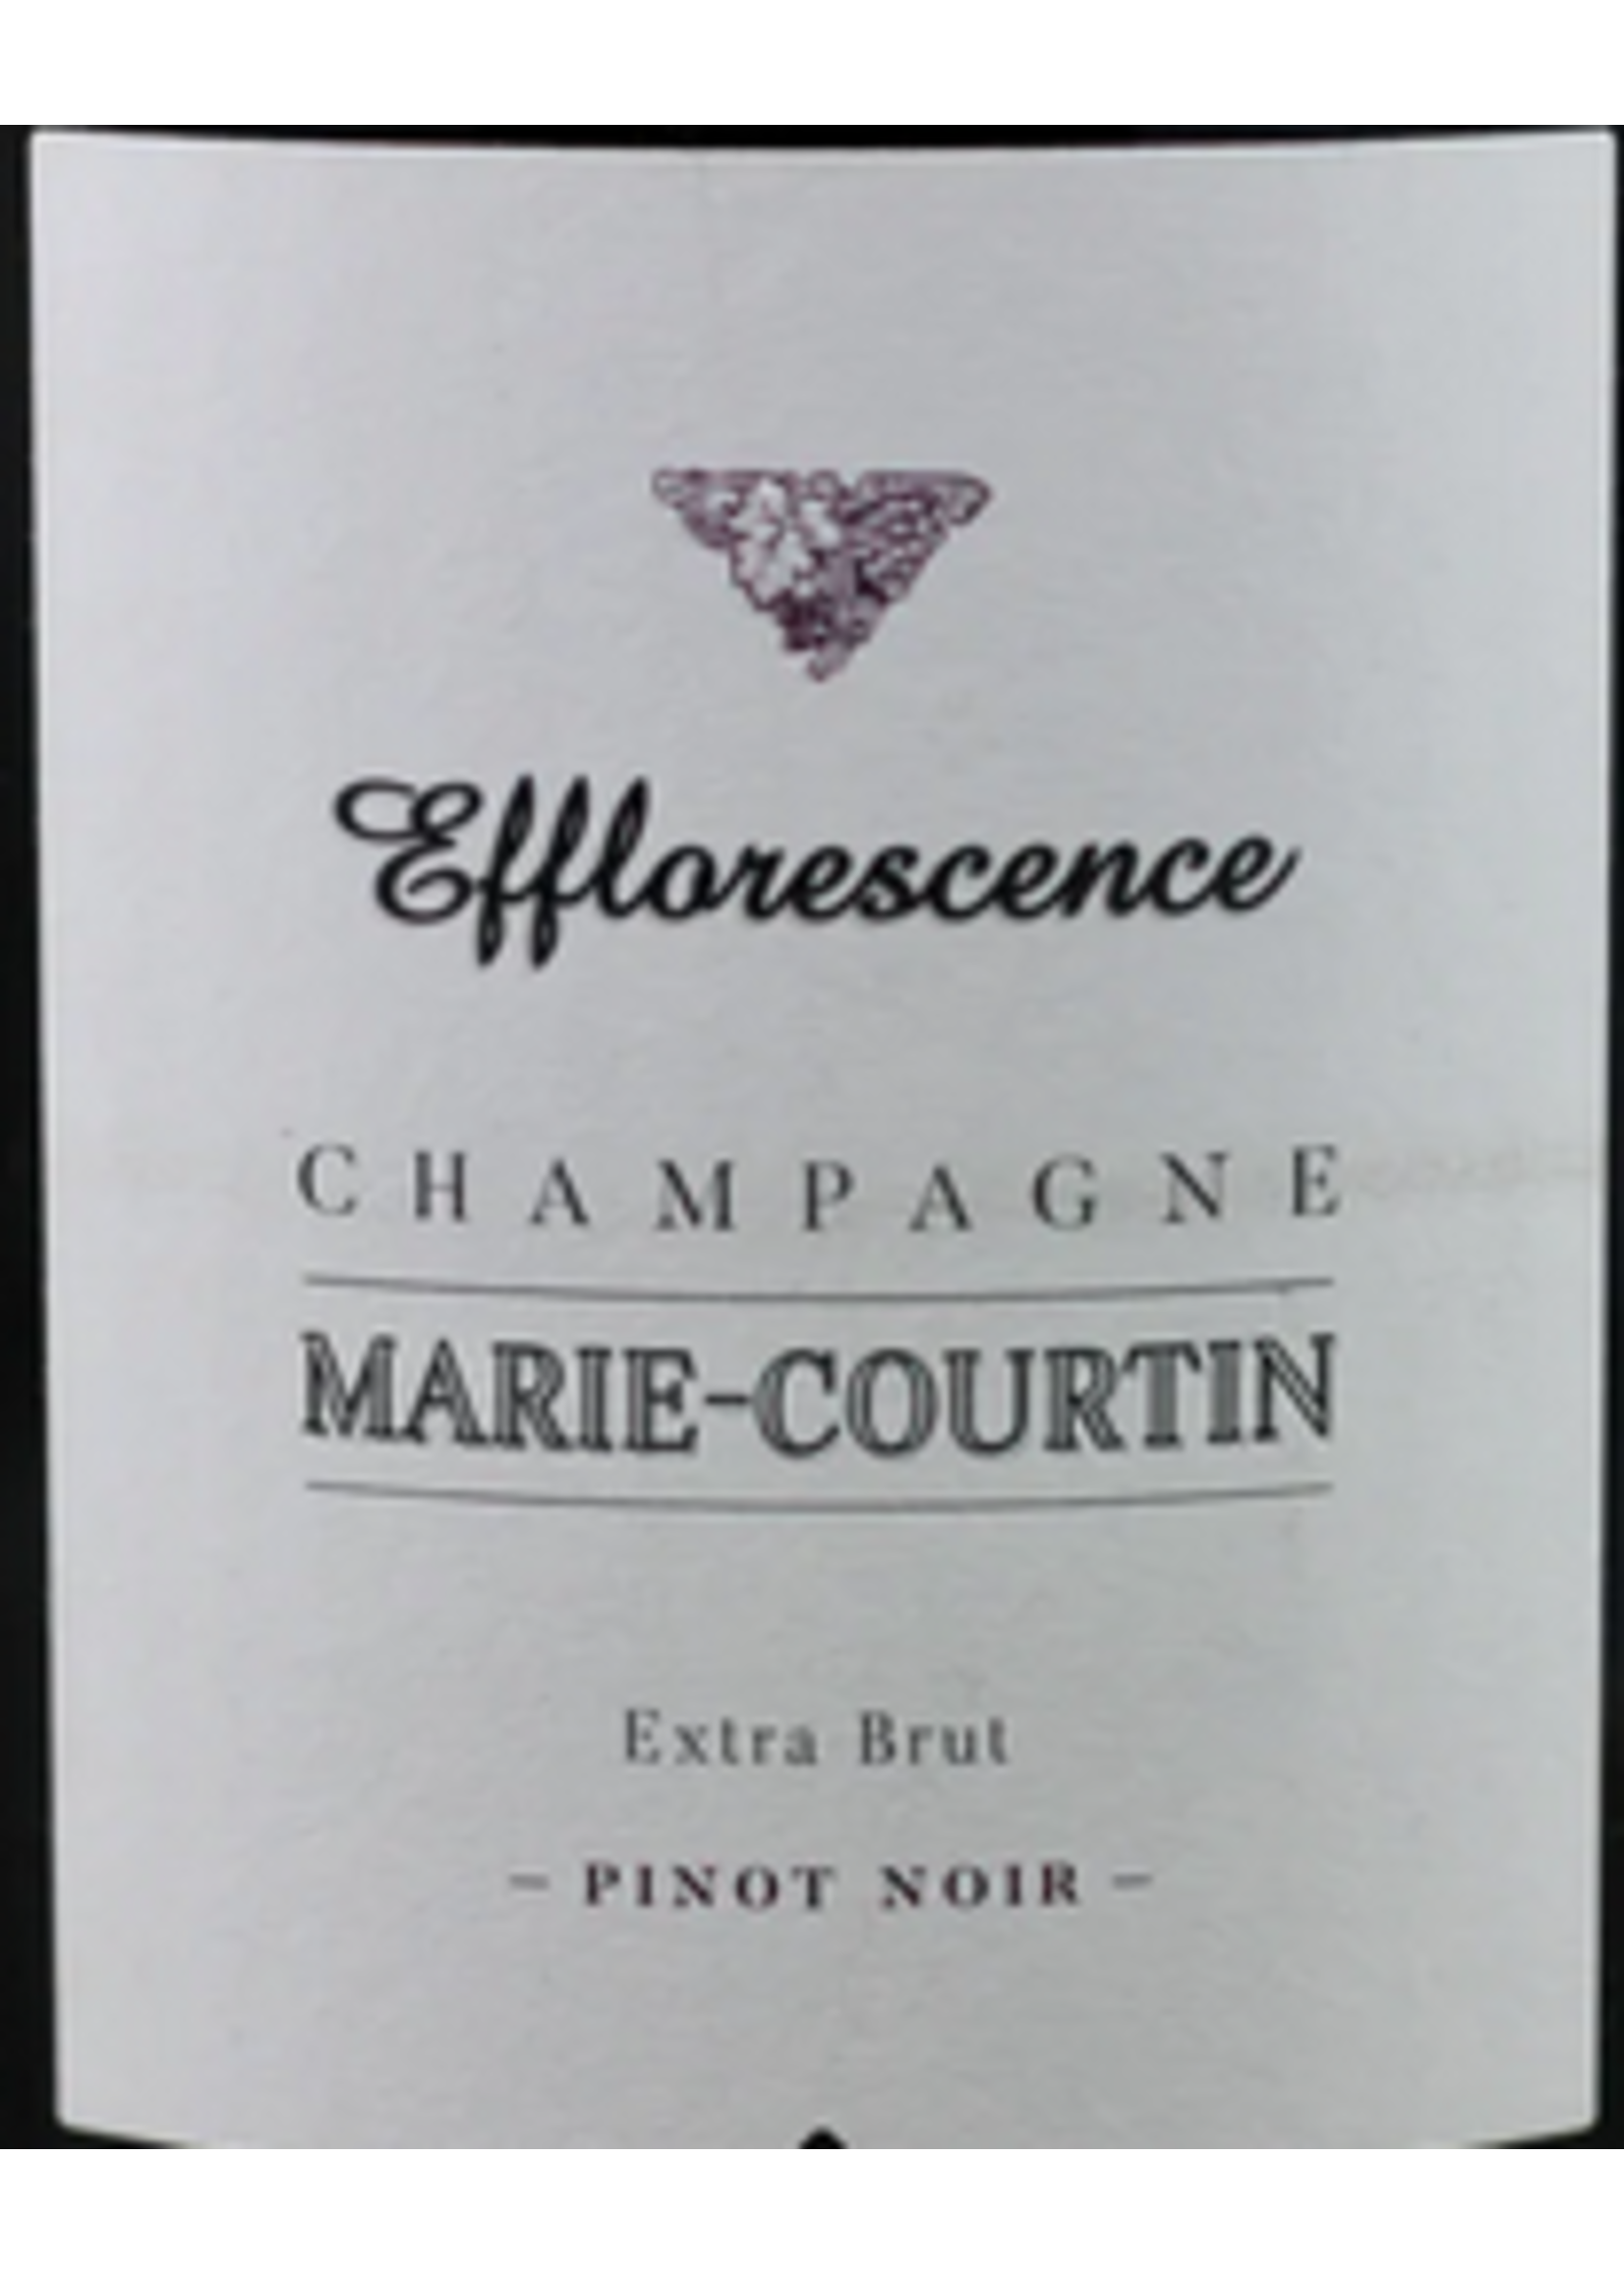 Champagne Marie Courtin French Sparkling - Champagne Marie-Courtin - Efflorescence Extra Brut 100% Pinot Noir 2016